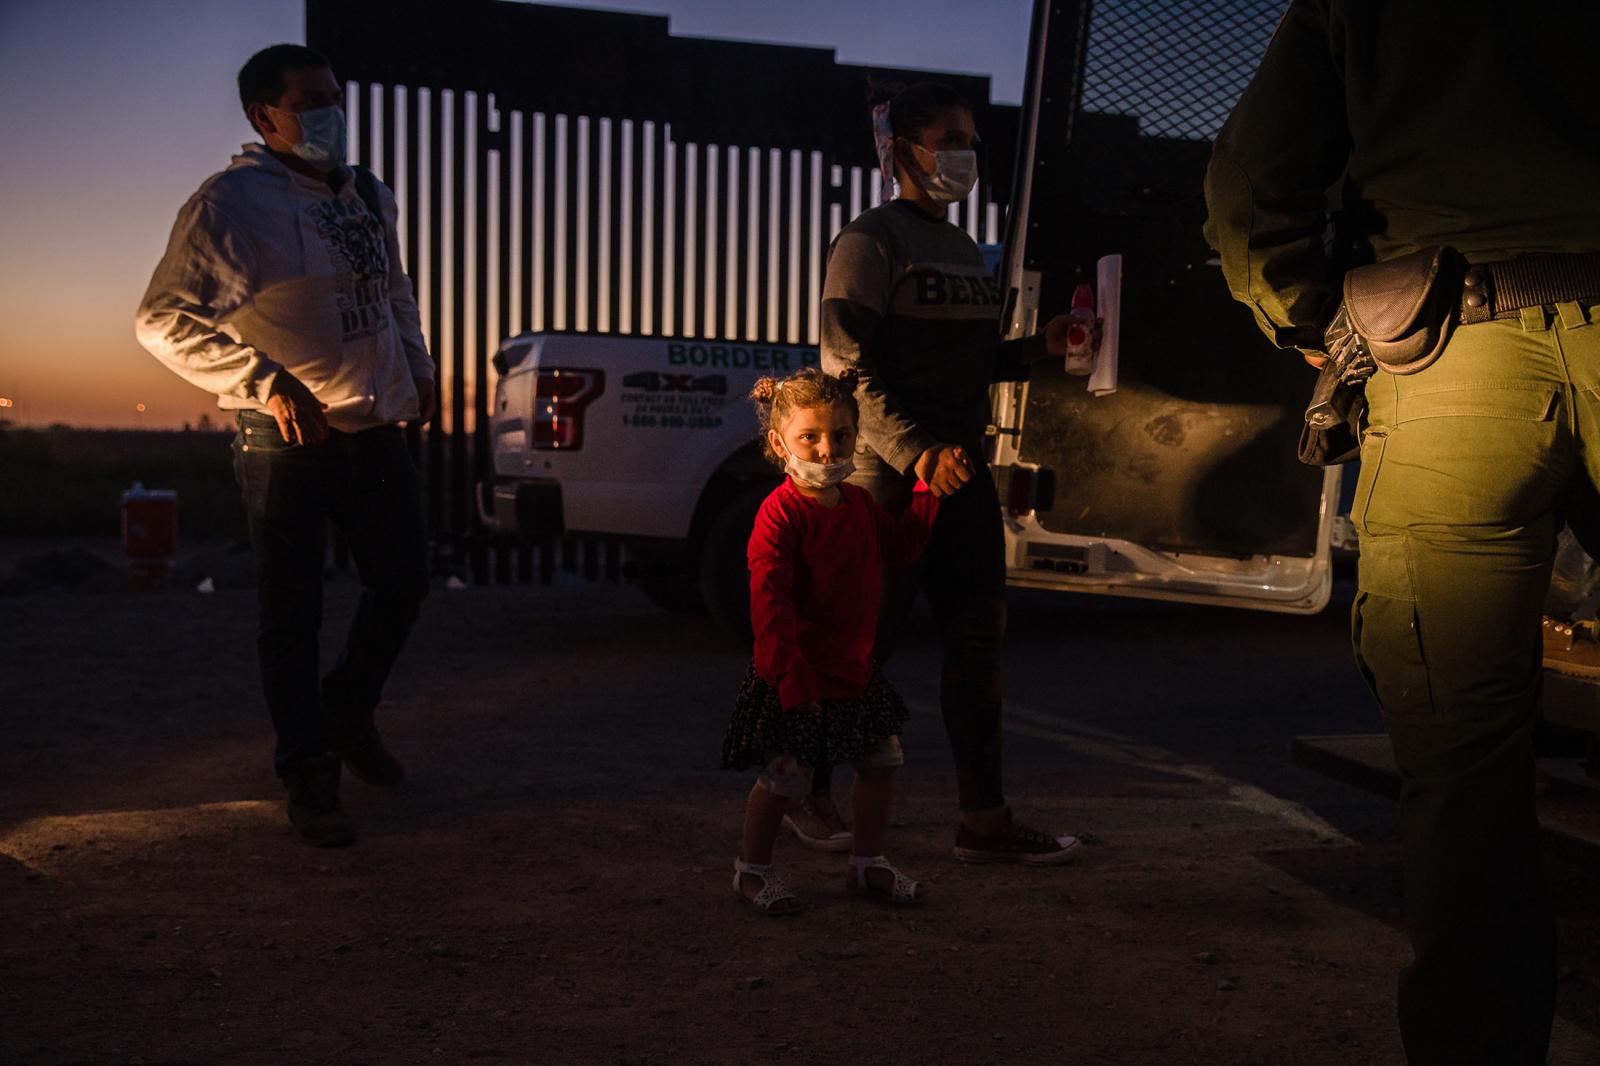 Undocumented migrants being transported to an immigration processing center by border patrol agents in Yuma, Arizona on May 4, 2021.